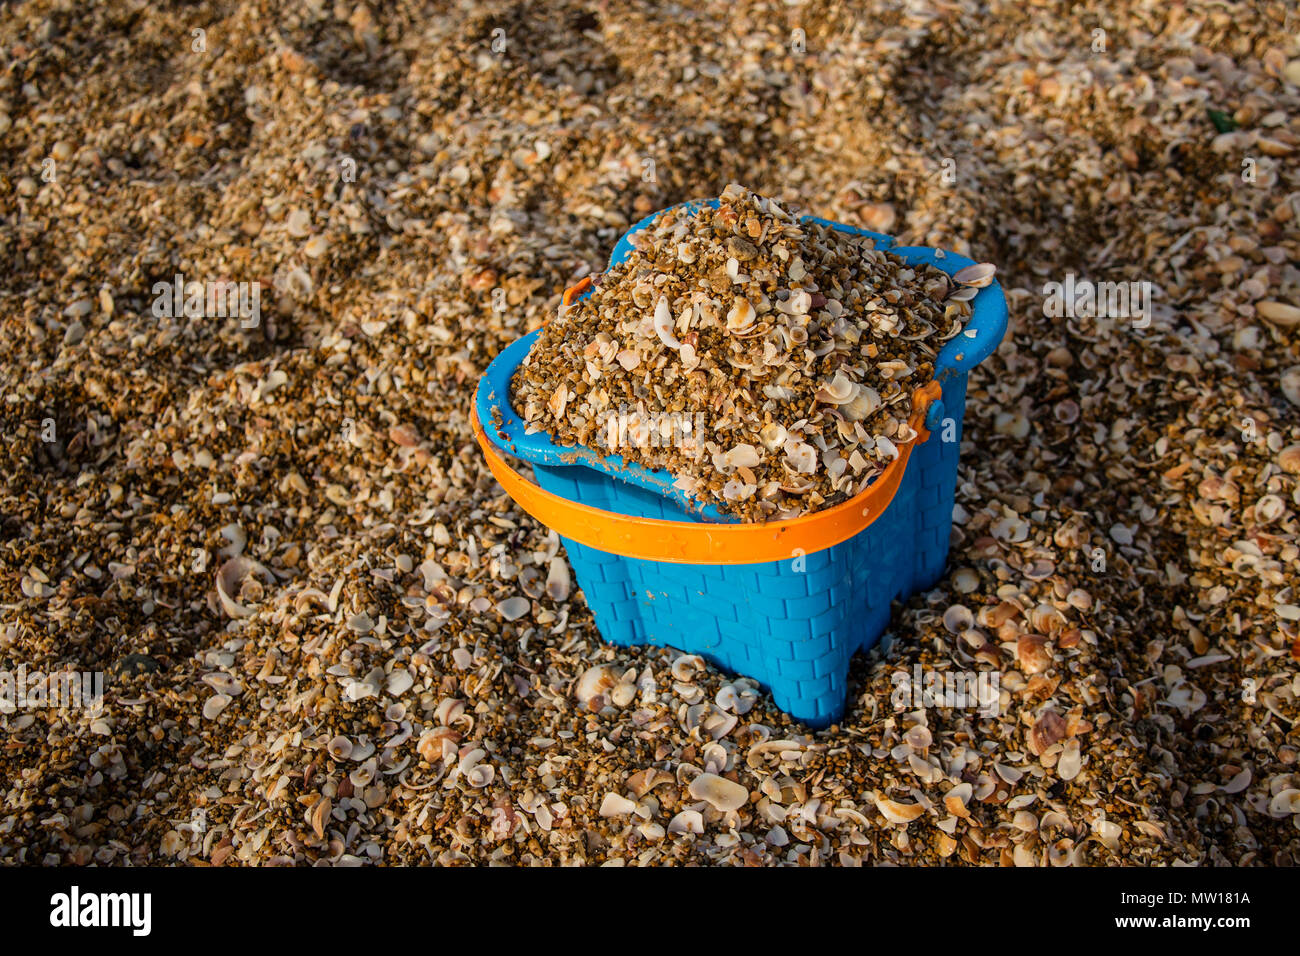 A light blue plastic bucket filled with sand and broken shells at the beach Stock Photo